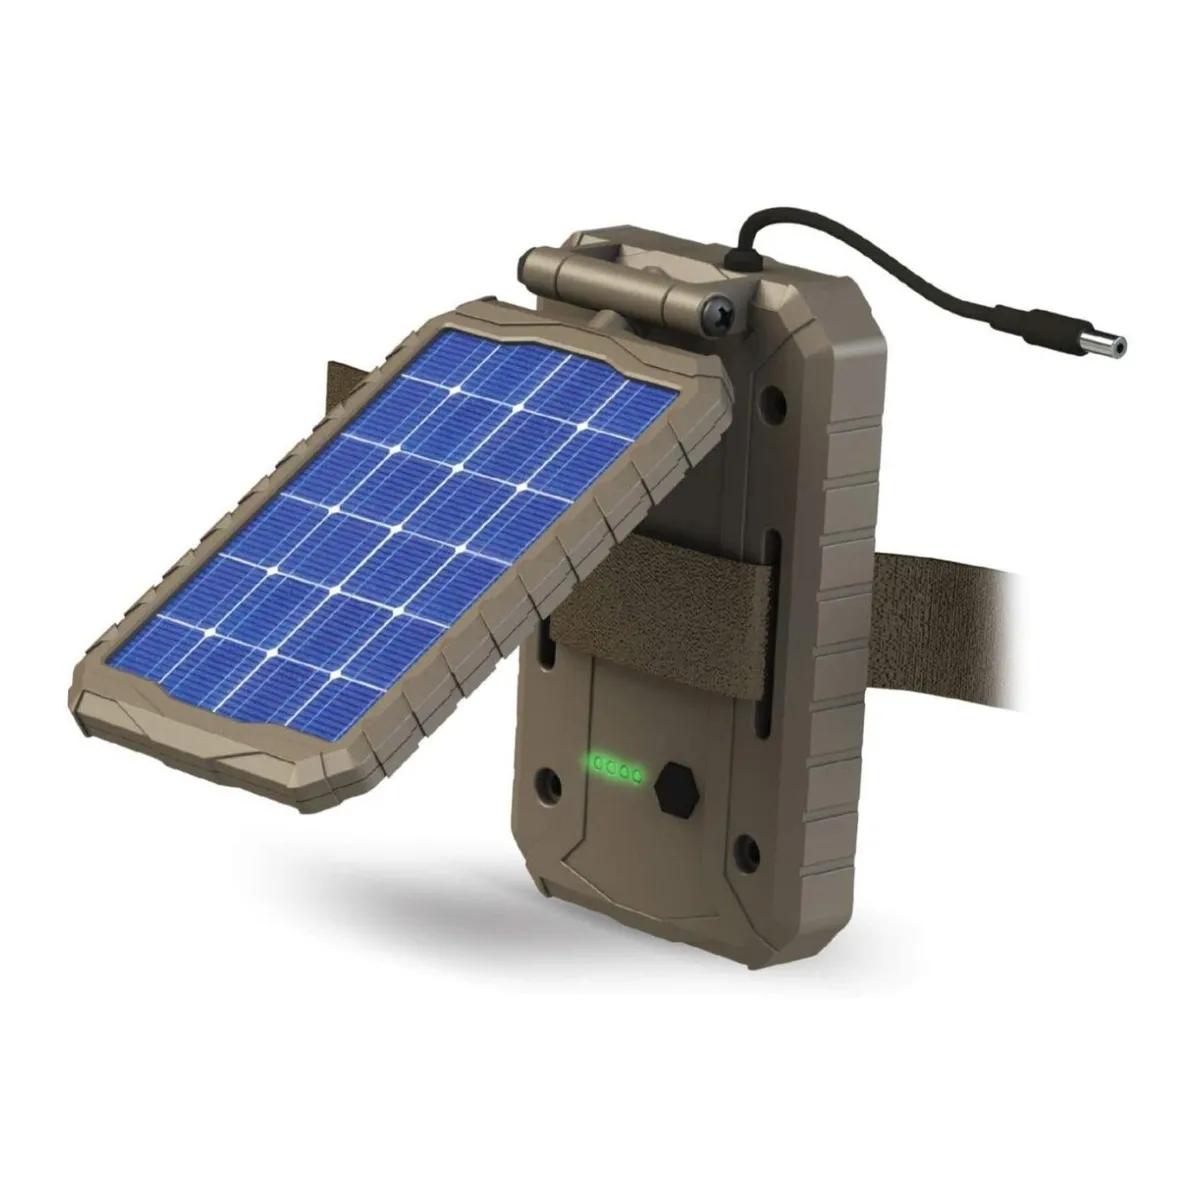 stealth solar panels - How many batteries does a stealth cam take